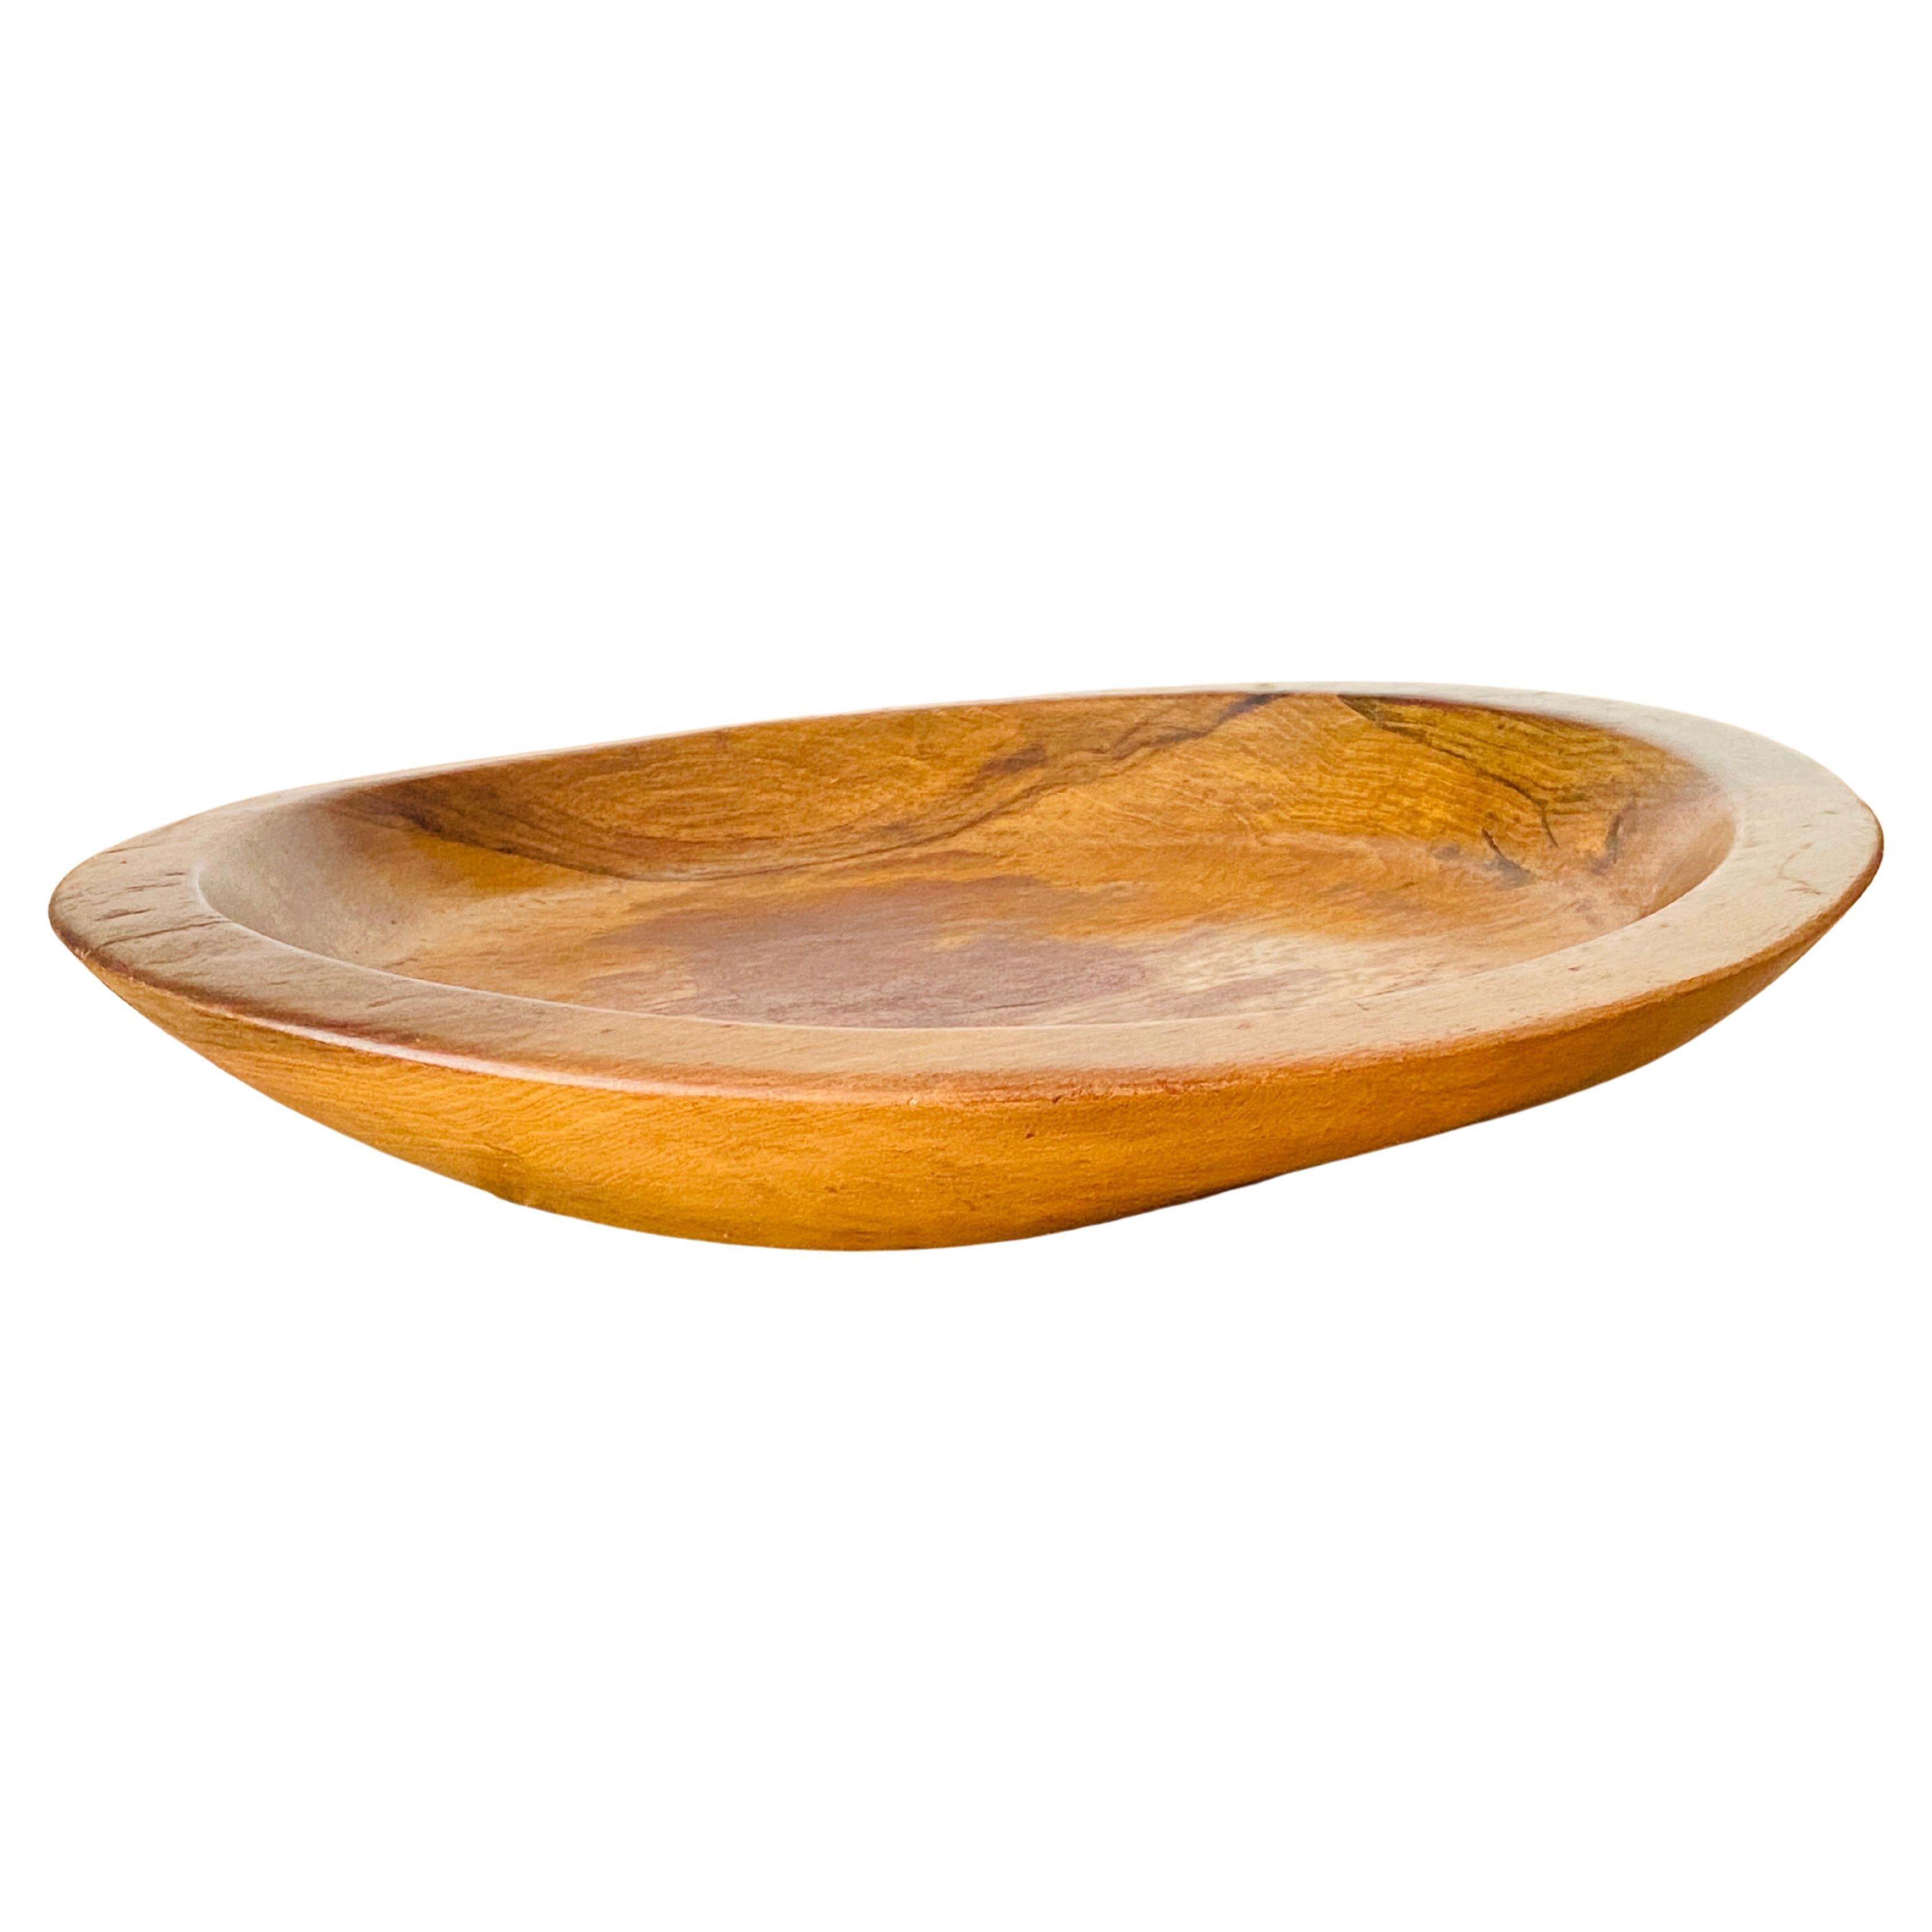 This dish is typical from the Minimalist style from the years 1950s. It has been done in France. Brown Color.